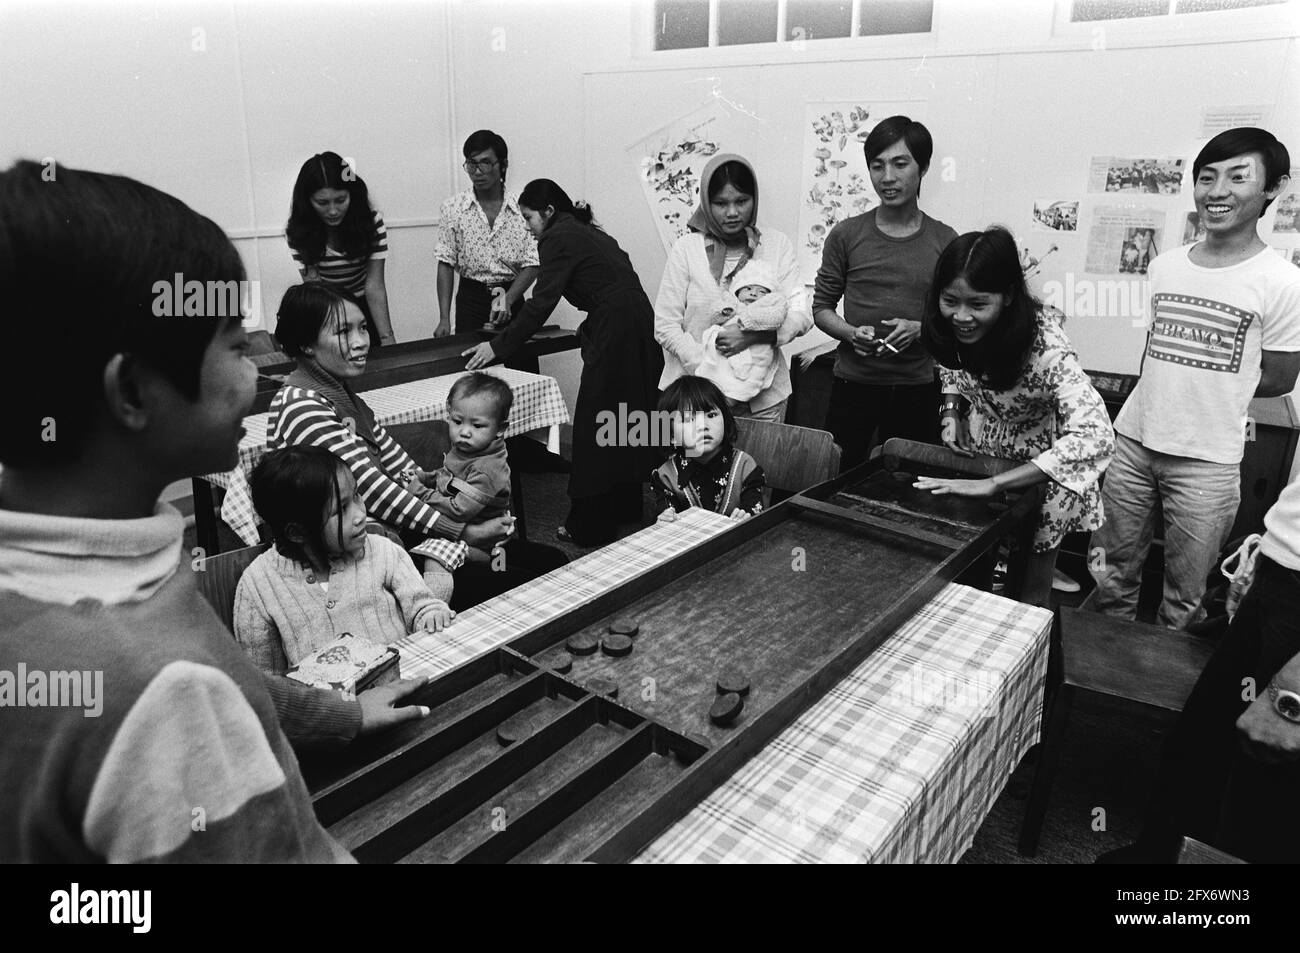 Behind the shuffleboard, July 2, 1979, boat refugees, board games, The Netherlands, 20th century press agency photo, news to remember, documentary, historic photography 1945-1990, visual stories, human history of the Twentieth Century, capturing moments in time Stock Photo